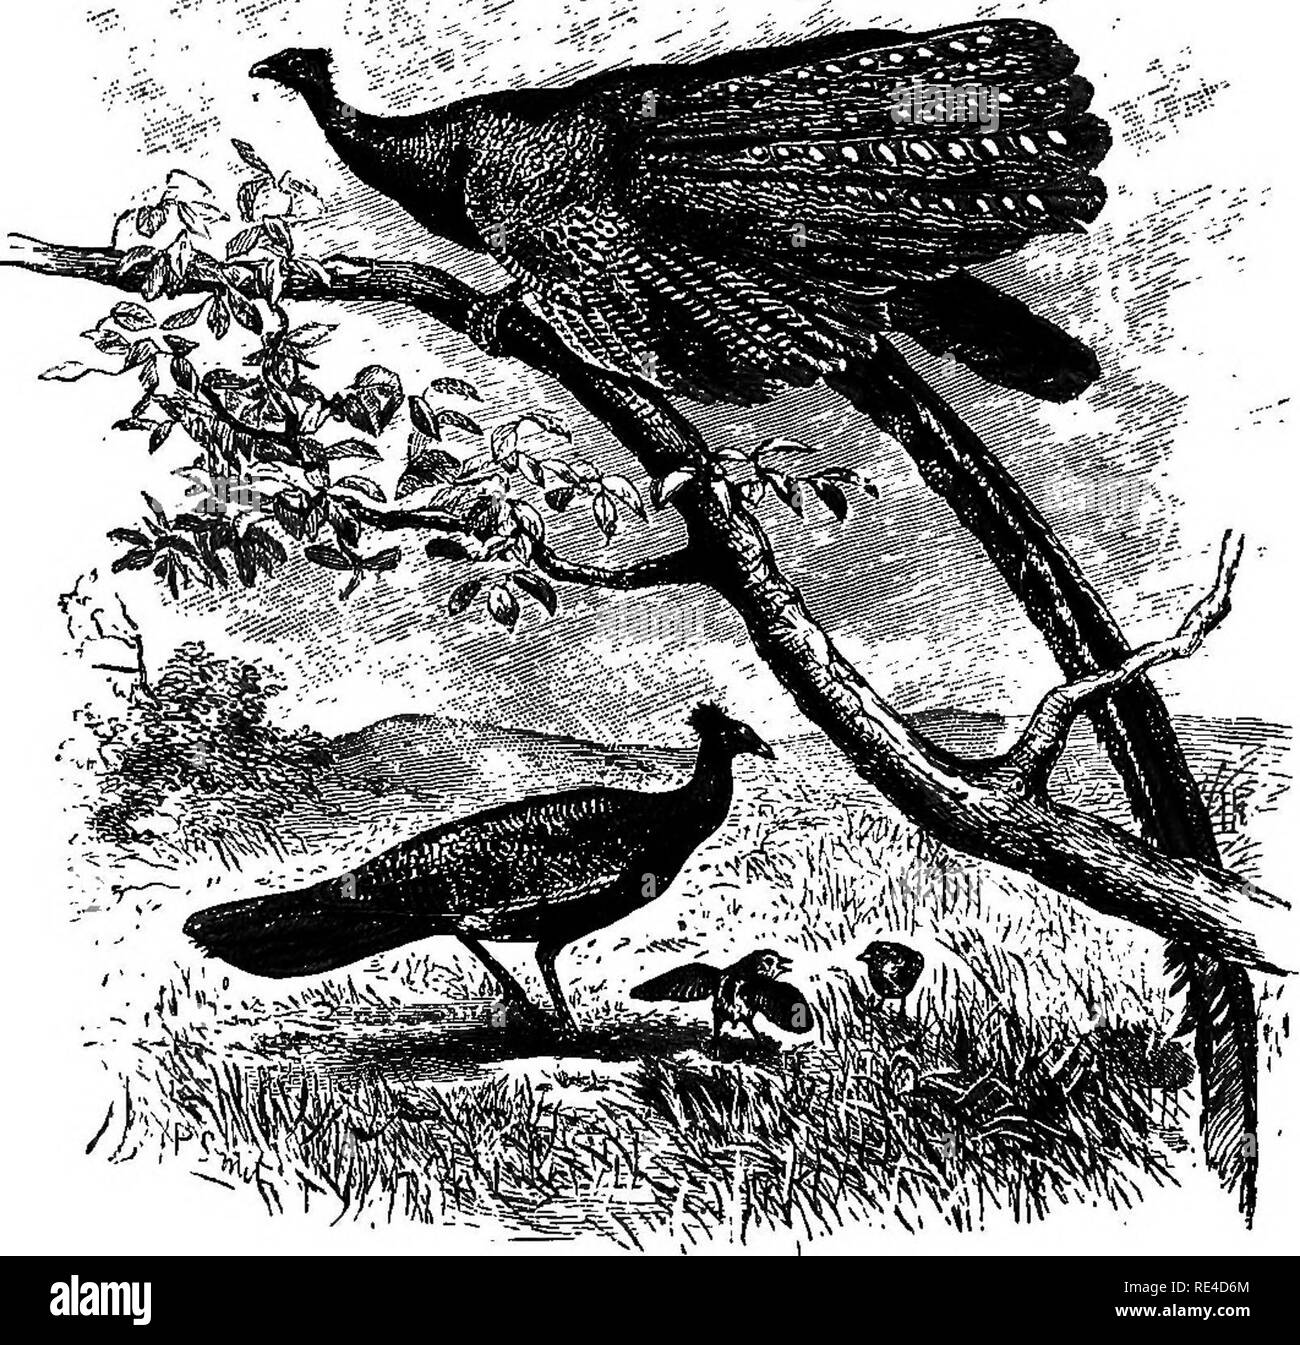 . Birds. Birds. Pig. X2. ArgvManus argus. (From the group in the British Museum.) Order XIV. GALLING. The true Game-birds, the Grouse, Fowls, Peacocks, Pheasants, Turkeys, Partridges, Quails, and Guinea-fowls, with Megapodes, Curassows, and Guans, form a well-defined and easily recognizable order. They have a stout bill, strong legs and feet, suited for progress on the ground, a plump body and rounded wings, in which the 5th secondary is present, and there are 10 primaries. There ' is frequently a spur, sometimes more than one, on the tarsus in males, and, in a few genera, in females also. The Stock Photo